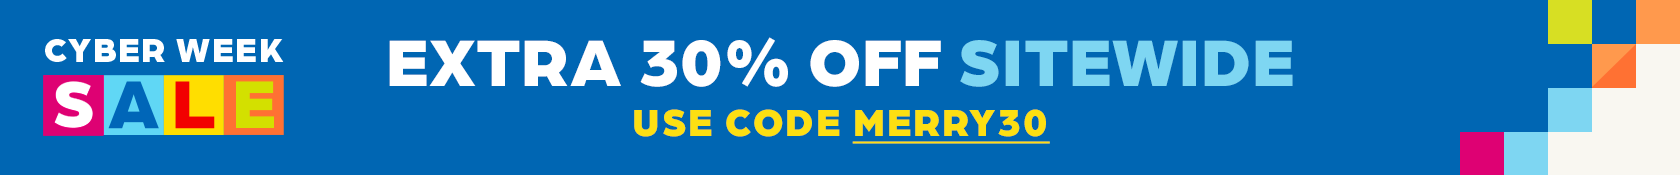 Get 30% OFF sitewide with code MERRY30.